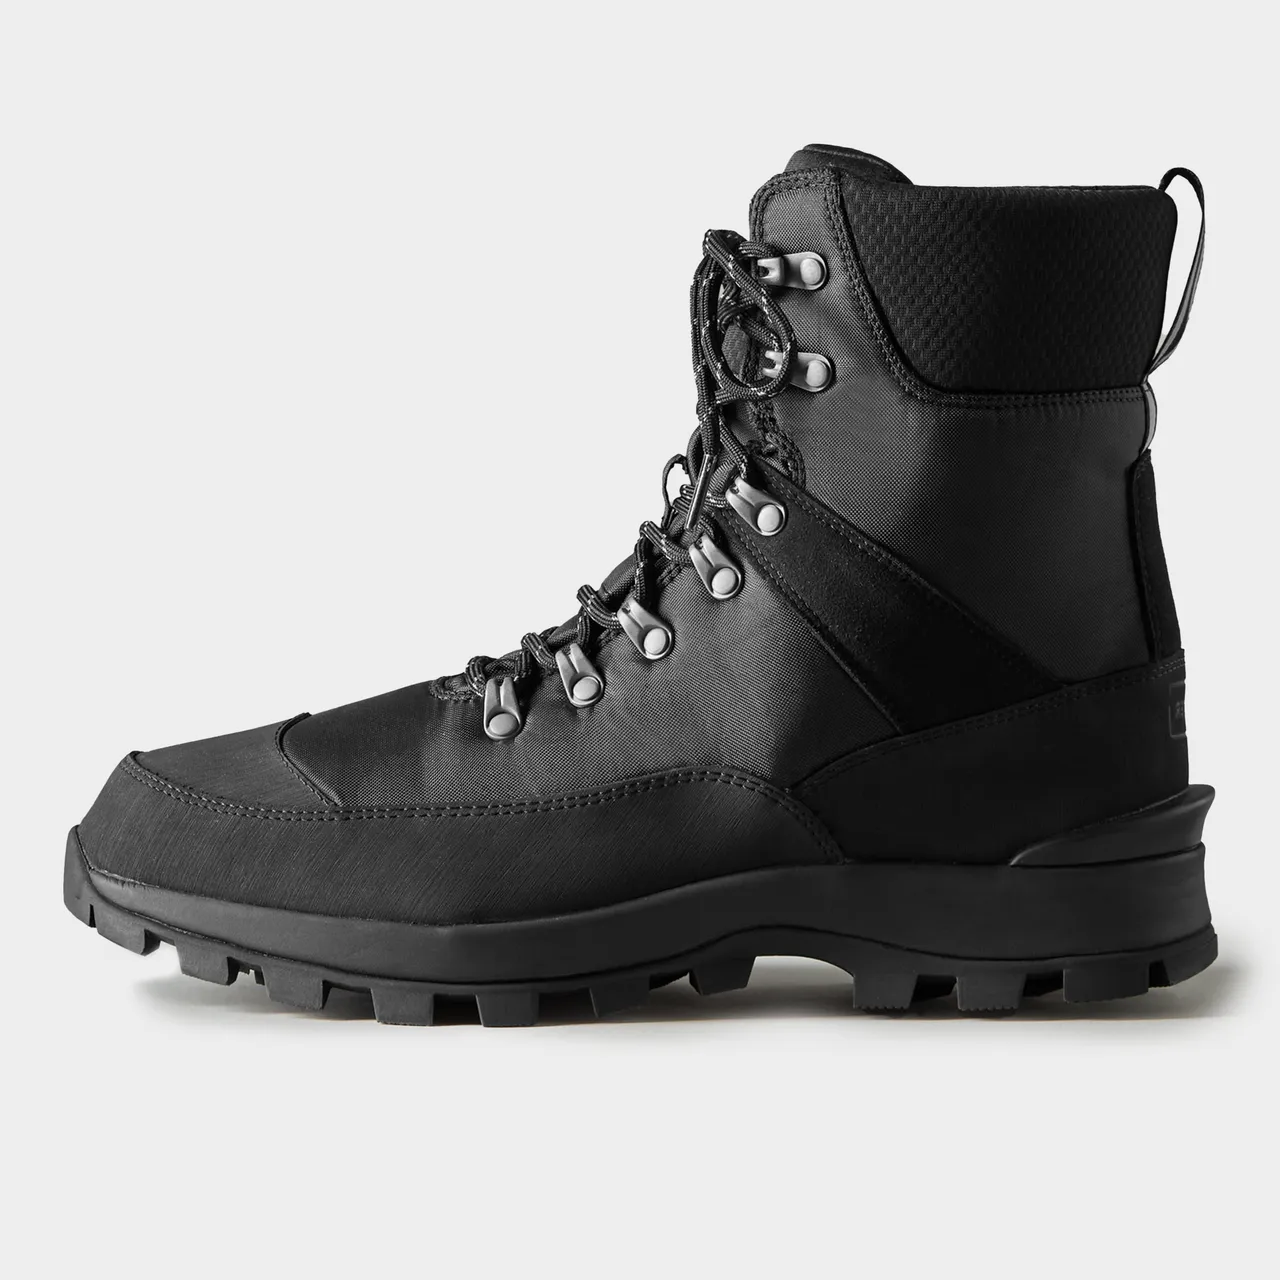 Men's Recycled Commando Boots